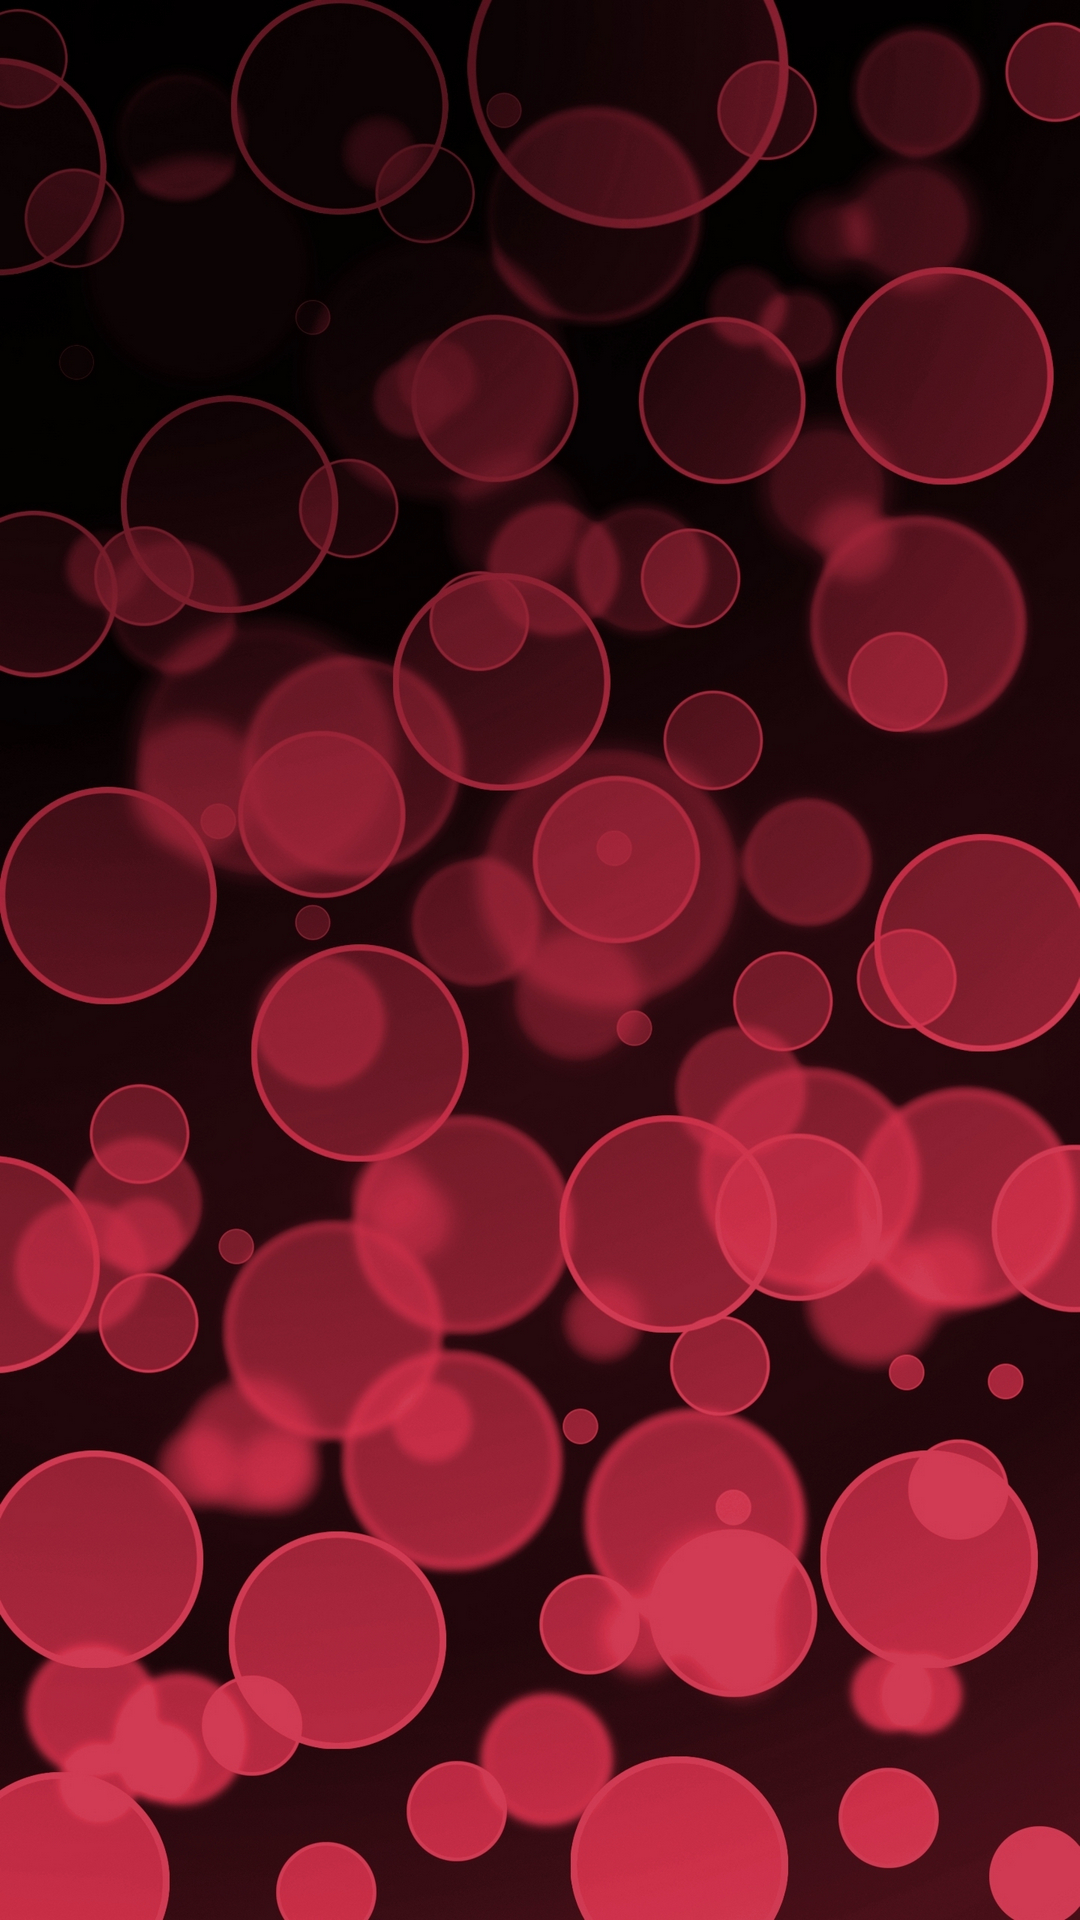 Htc Butterfly Wallpaper Pink Bubbles Android